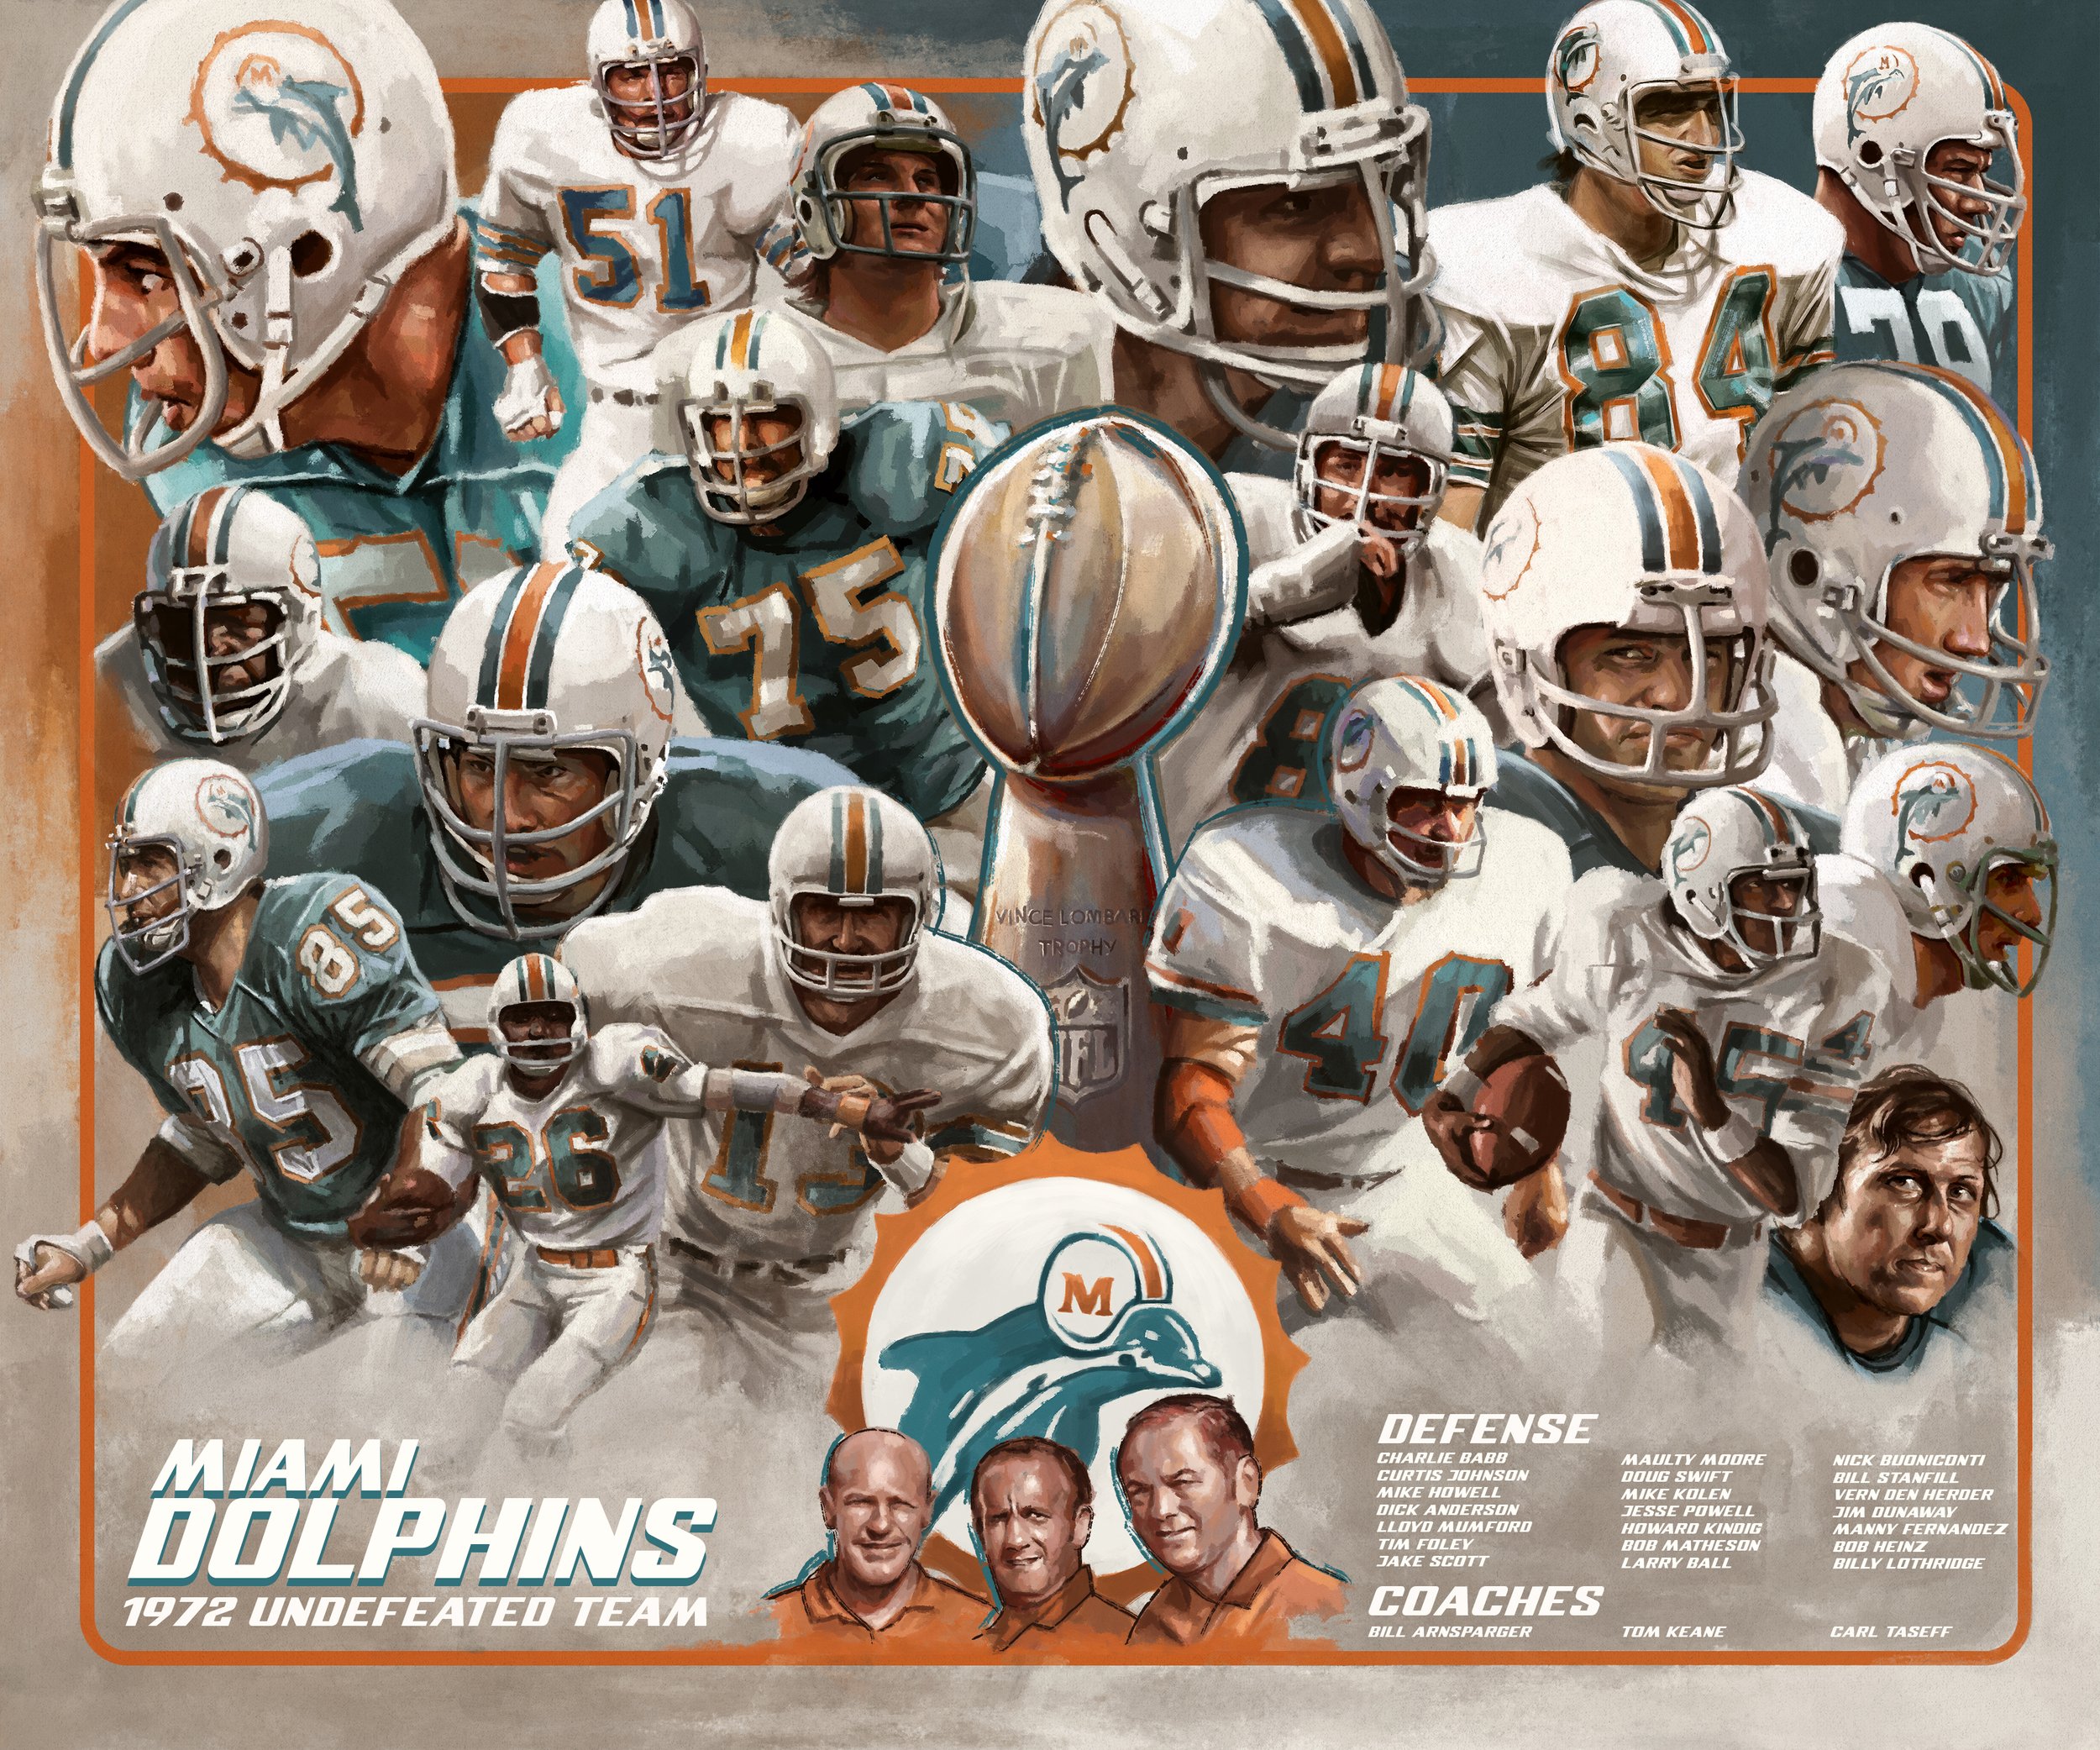  Legends Never Die 1972 Miami Dolphins Mosaic Framed Photo  Collage, 11x14-Inch Black : Sports & Outdoors